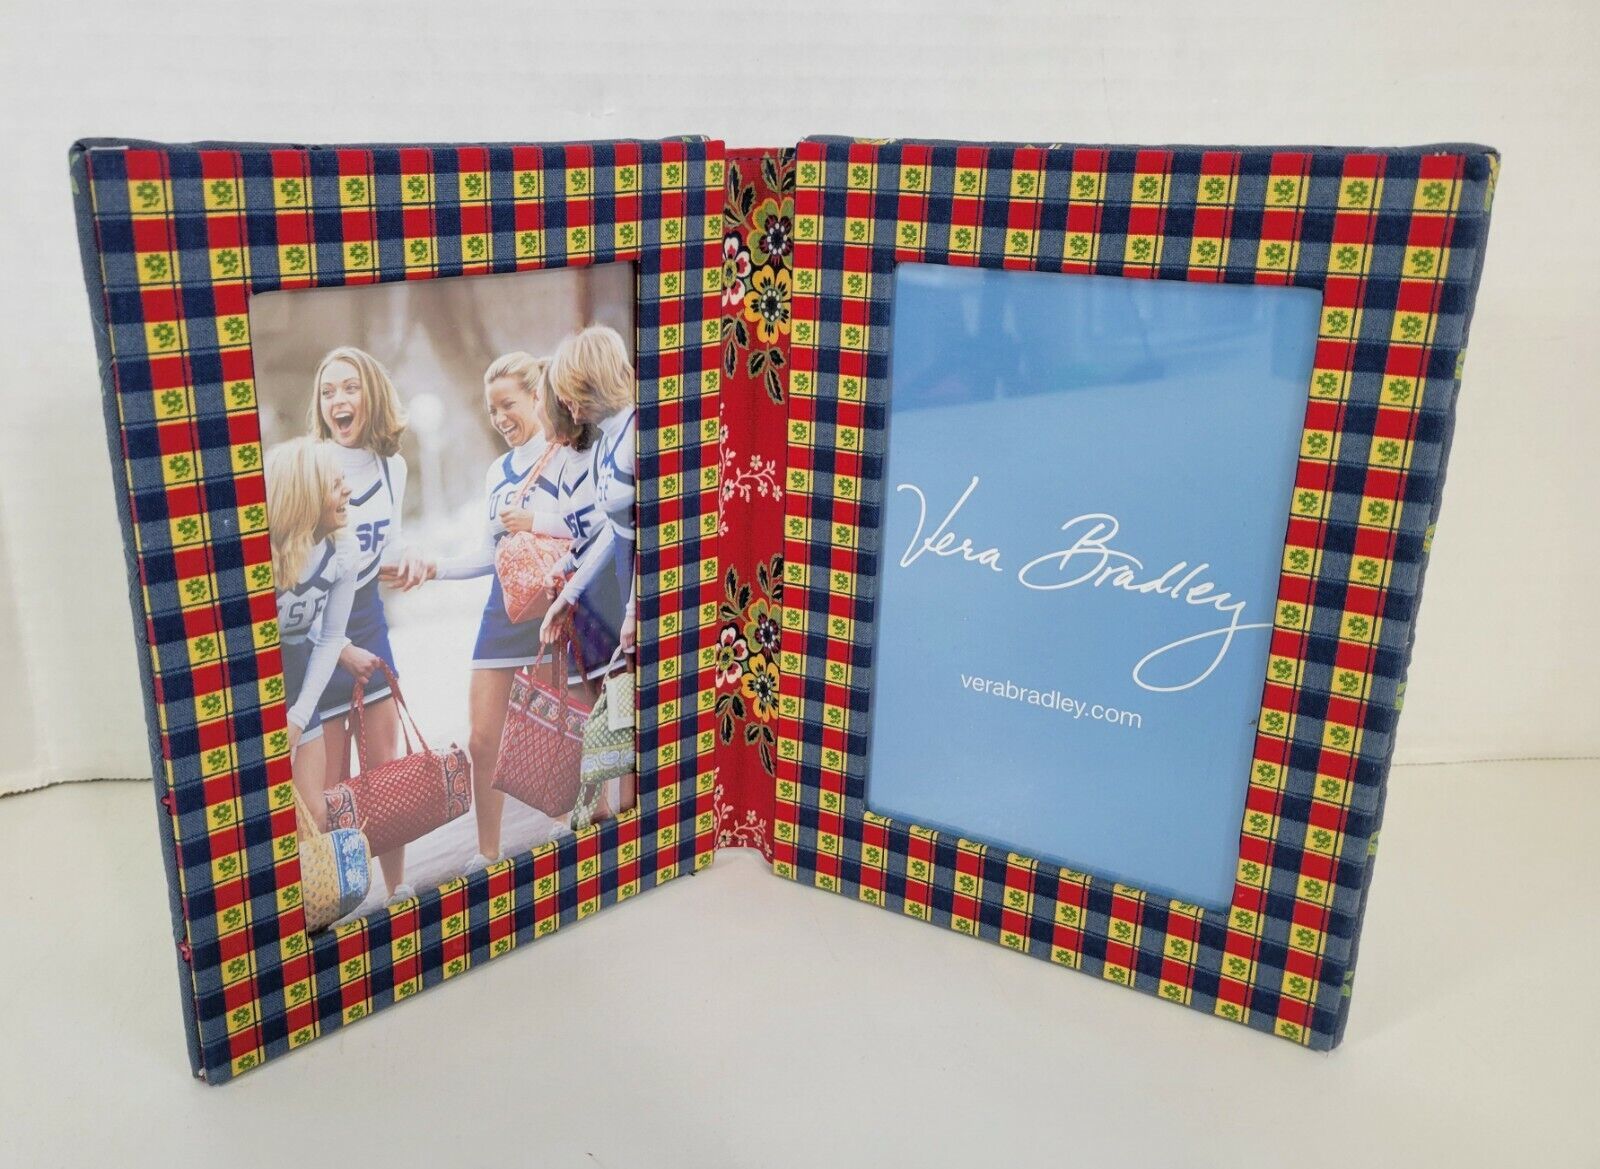 Vera Bradley Picture Frame Fabric Quilt Blue Red 2 Two Picture Holder Book 4x6 - $7.66